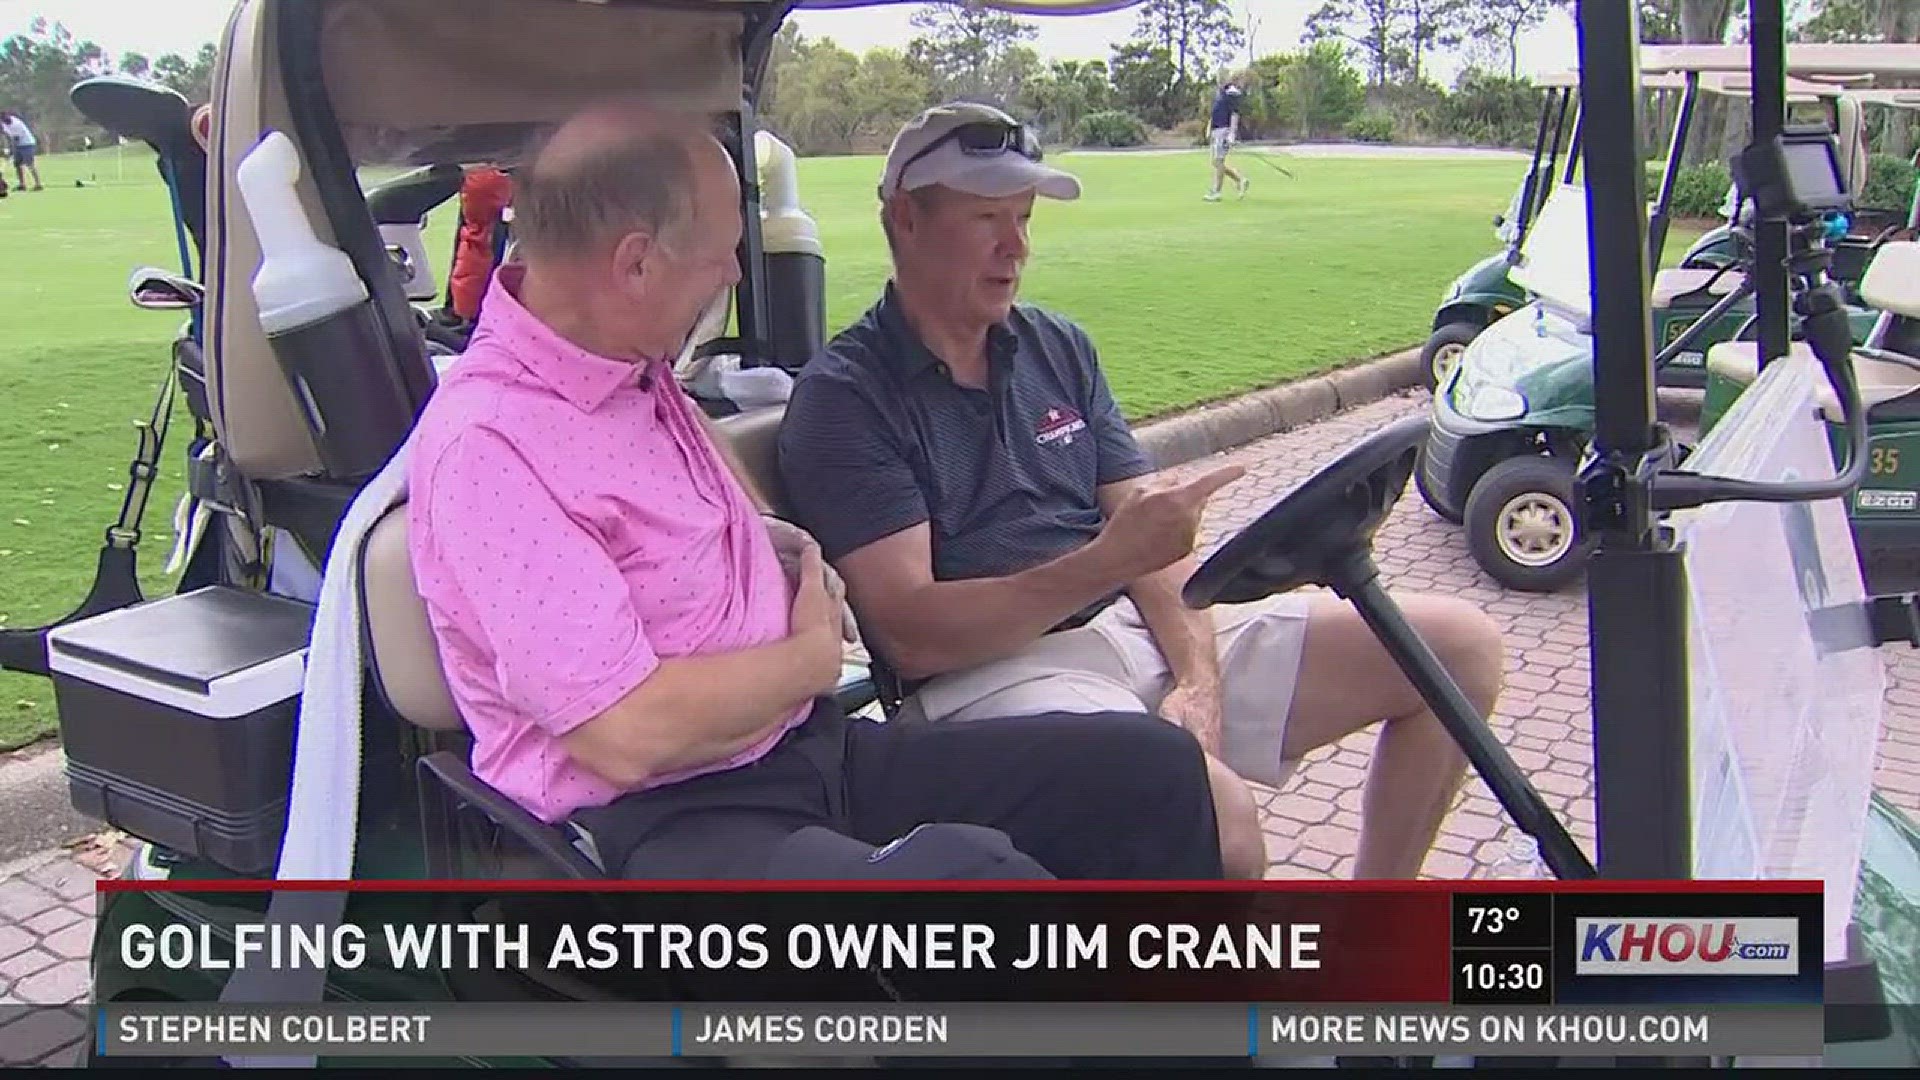 KHOU 11 Sports' Matt Musil went one-on-one with Houston Astros owner Jim Crane in Florida during spring training.